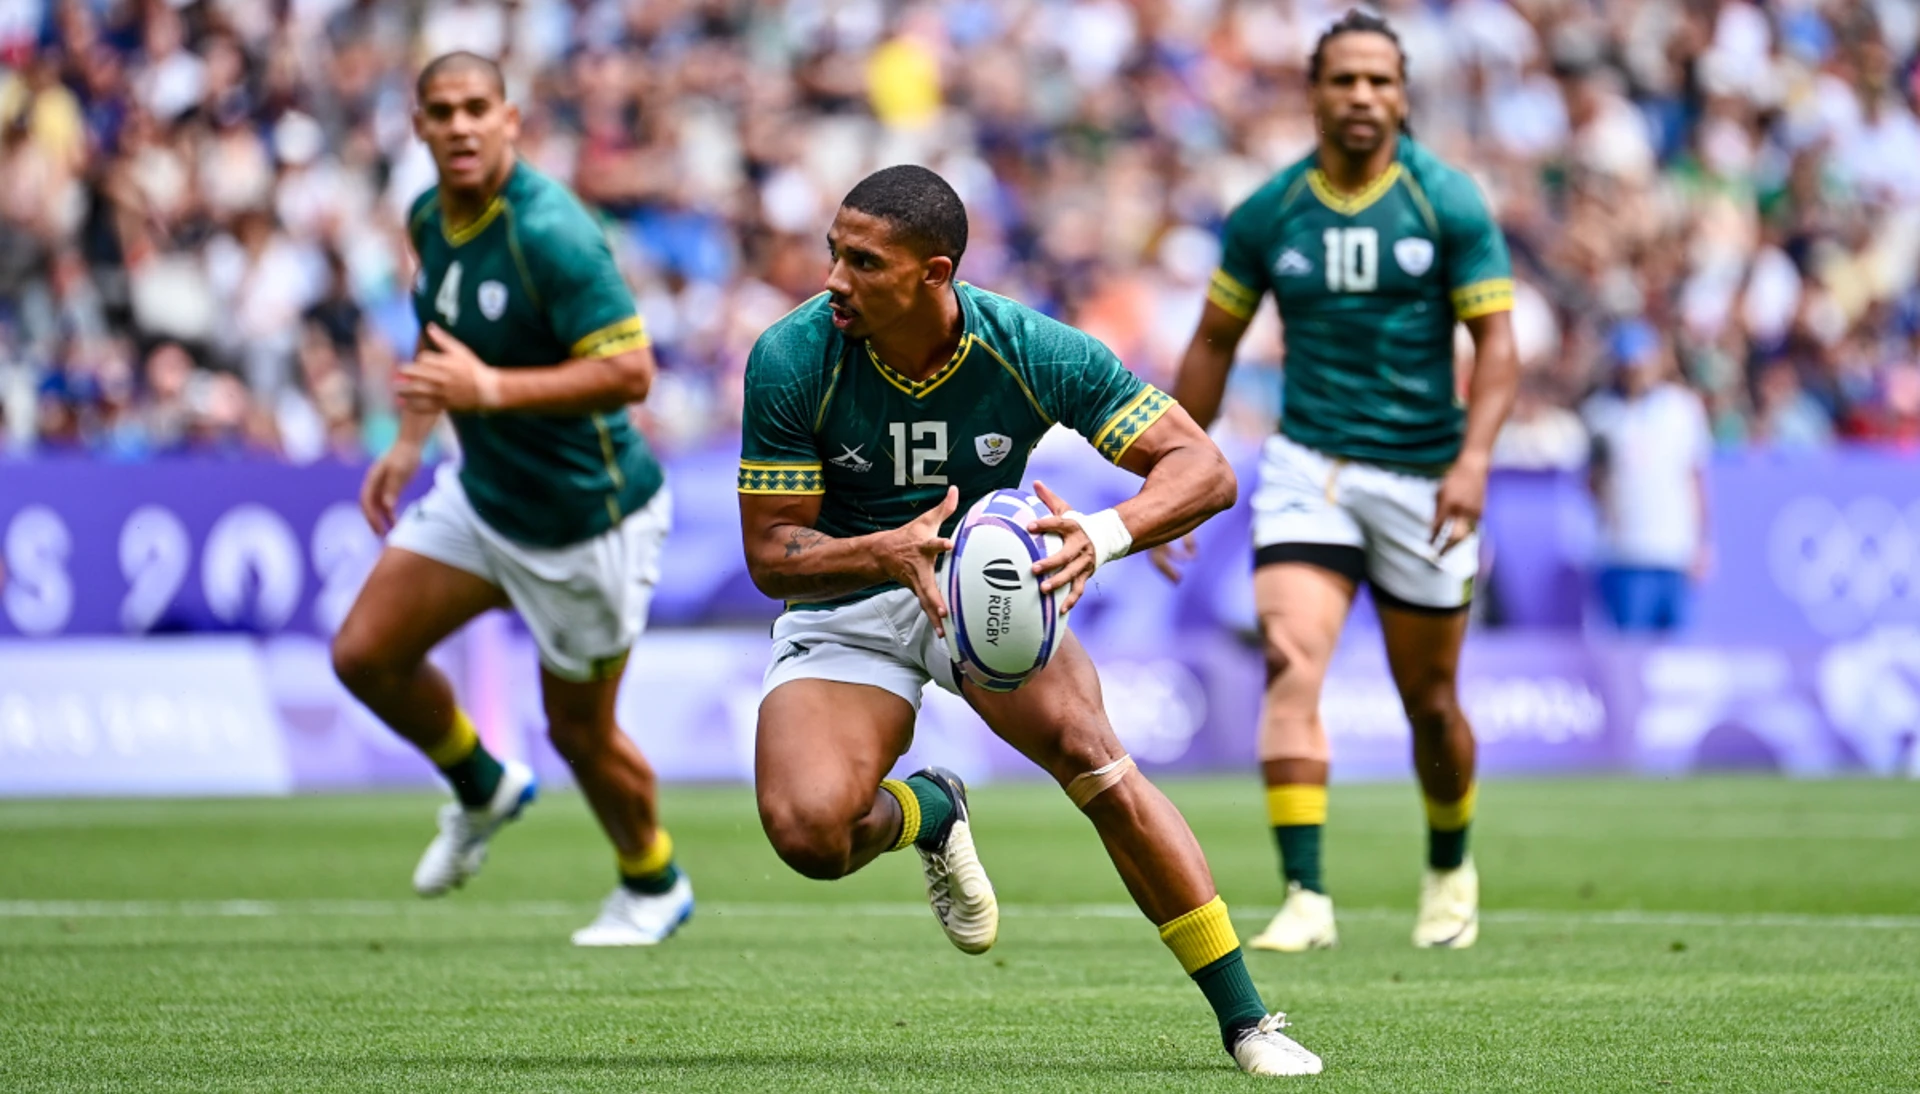 Blitzboks produce the upset of the Olympics, ousting All Blacks in dramatic fashion